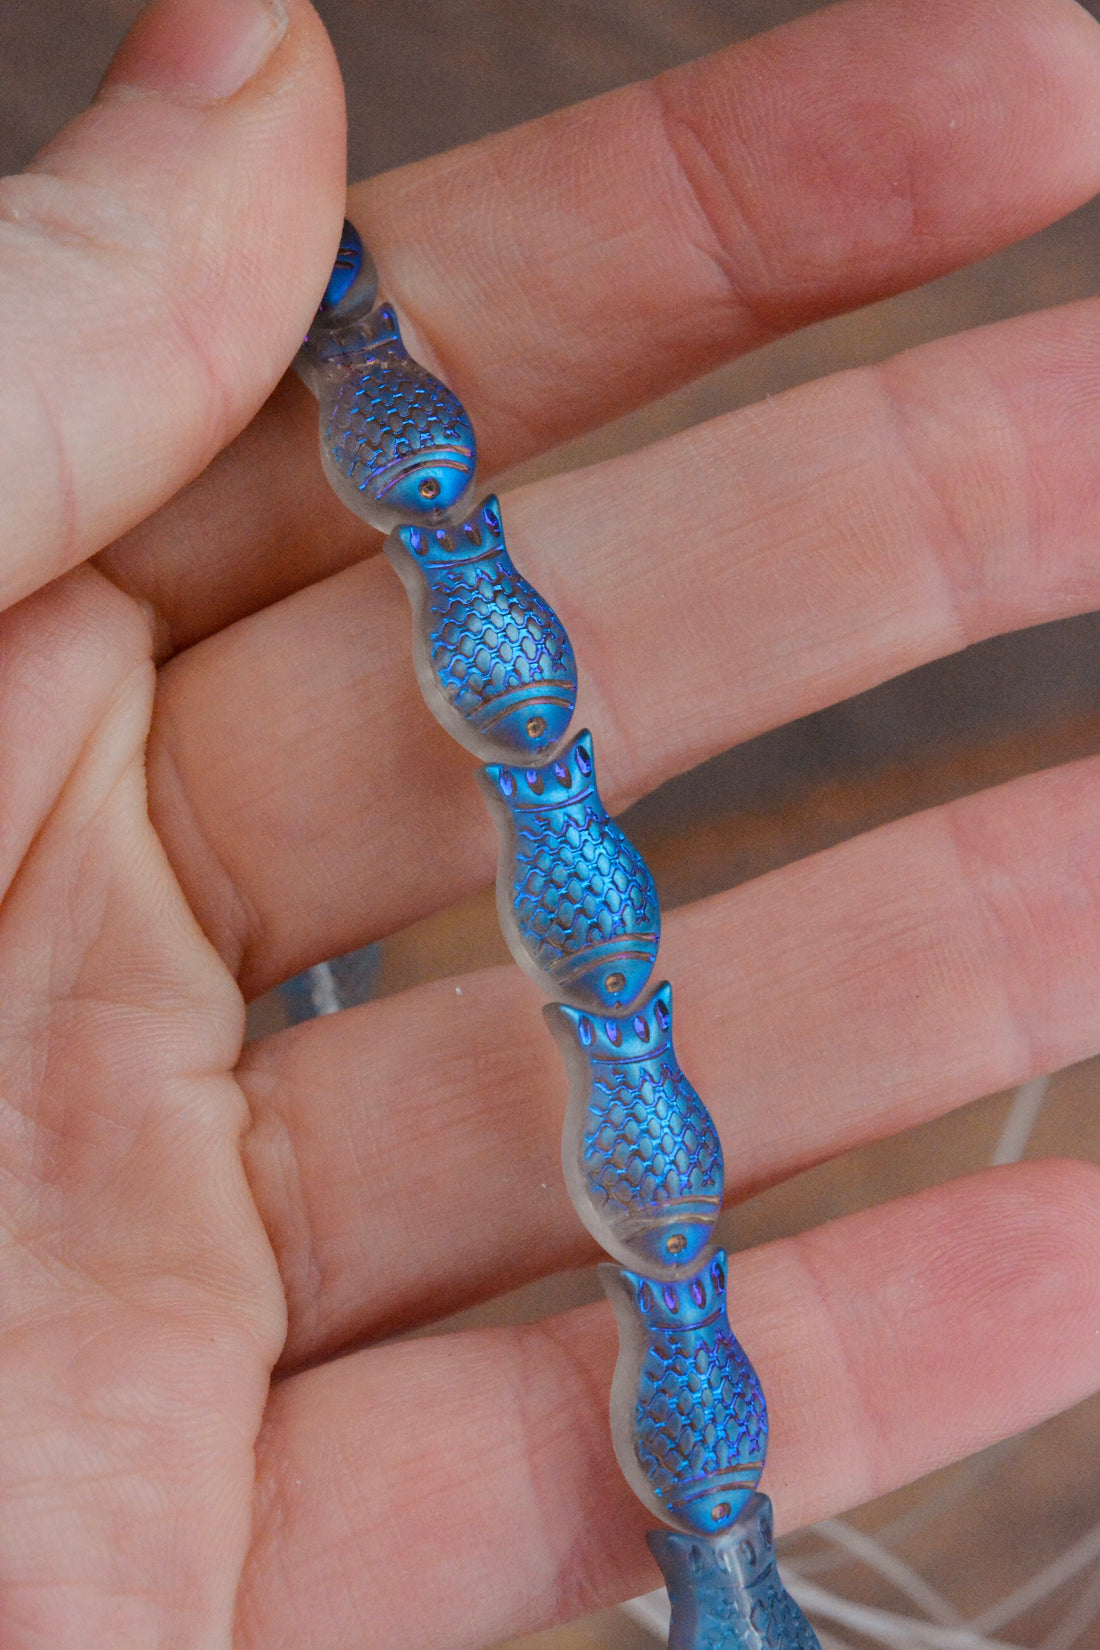 Glass Fish - Light Blue Scales